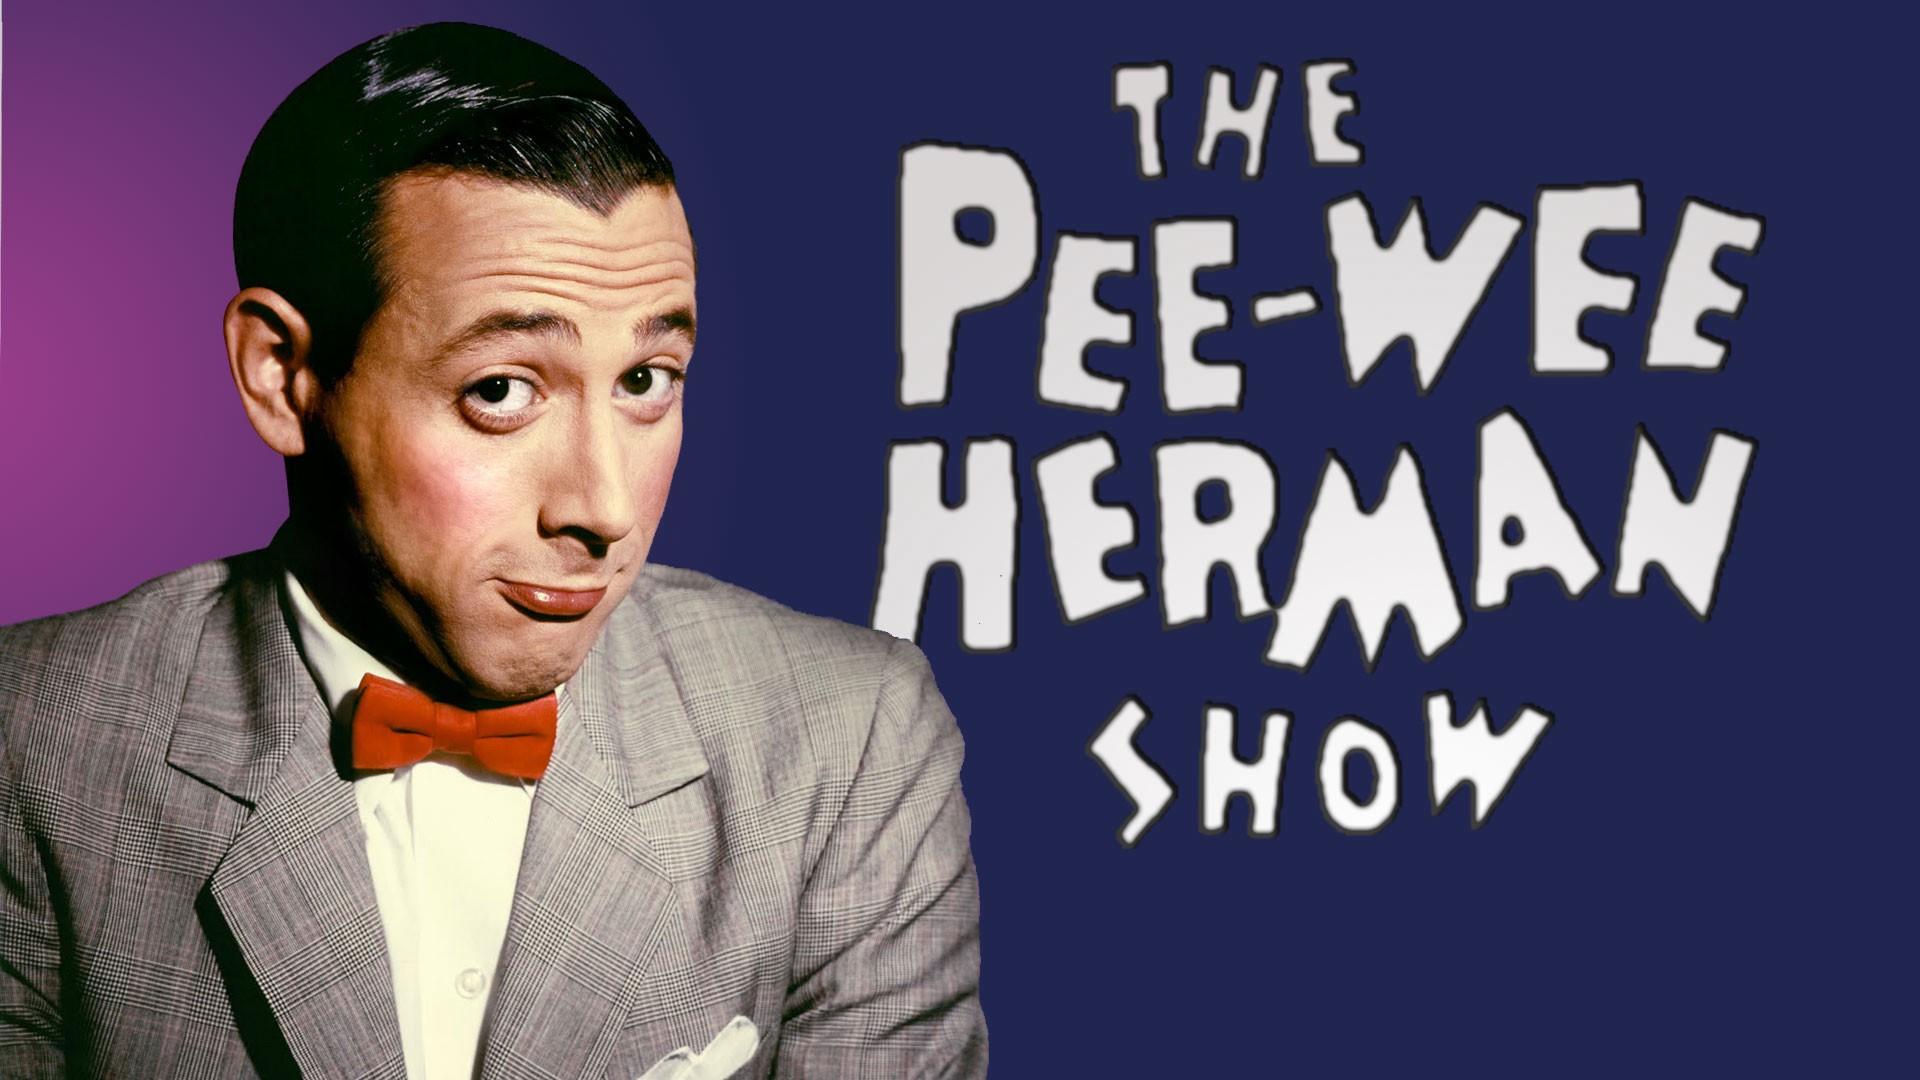 The Pee Wee Herman Effect: Engagement and Interest in Modern.